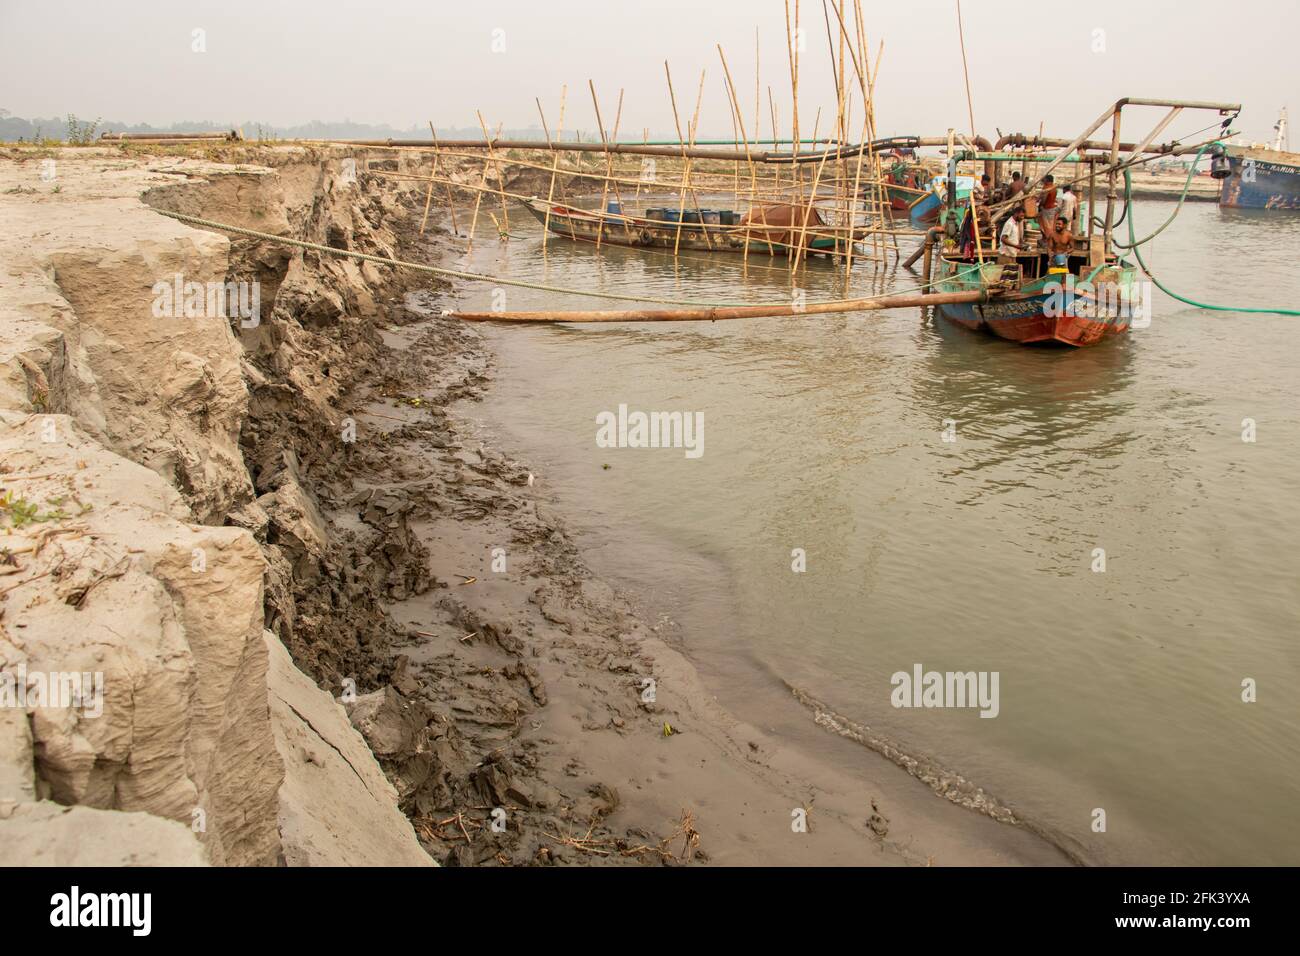 Massive erosion of the riverbank. I captured this image on 12-02-2021 from Bangladesh, South Asia Stock Photo